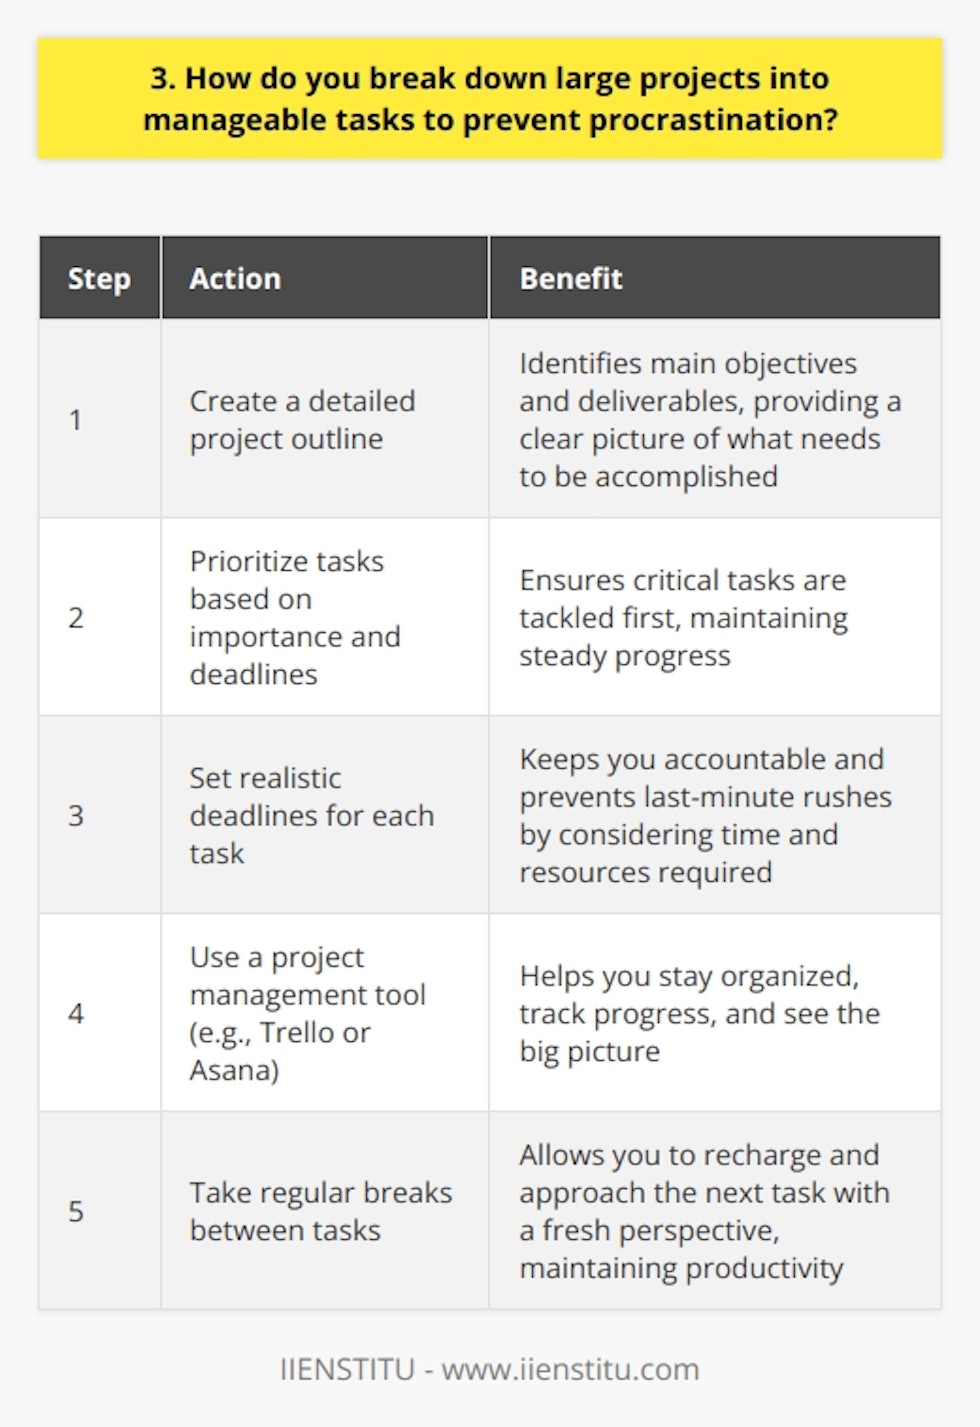 When faced with a large project, I start by breaking it down into smaller, manageable tasks. This helps me stay organized and focused, preventing procrastination and overwhelming feelings. Create a Project Outline First, I create a detailed outline of the project, identifying the main objectives and deliverables. This gives me a clear picture of what needs to be accomplished. Prioritize Tasks Next, I prioritize the tasks based on their importance and deadlines. This allows me to tackle the most critical tasks first, ensuring that I make steady progress. Set Realistic Deadlines For each task, I set realistic deadlines, considering the time and resources required. Having a timeline keeps me accountable and prevents last-minute rushes. Use a Project Management Tool I use a project management tool like Trello or Asana to track my progress. This helps me stay organized and see the big picture. Take Regular Breaks To maintain productivity, I take regular breaks between tasks. This helps me recharge and approach the next task with a fresh perspective. By breaking down large projects into smaller, manageable tasks, I can stay motivated and avoid procrastination. This approach has helped me successfully complete several complex projects in my previous roles.